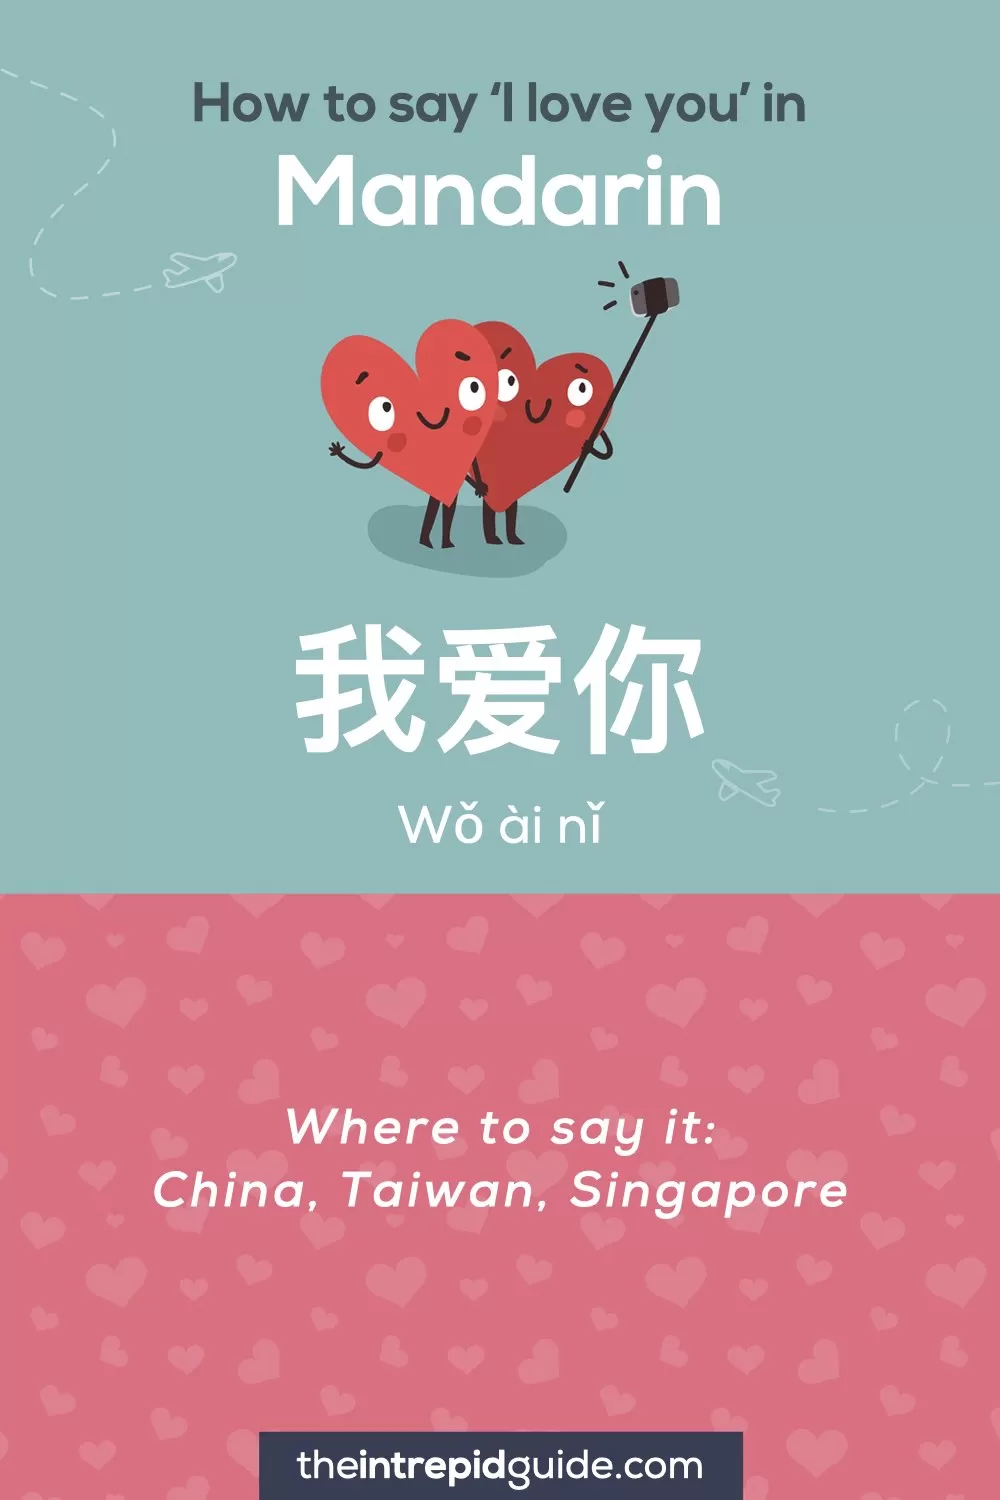 How to say I love you in different languages - Mandarin - 我爱你